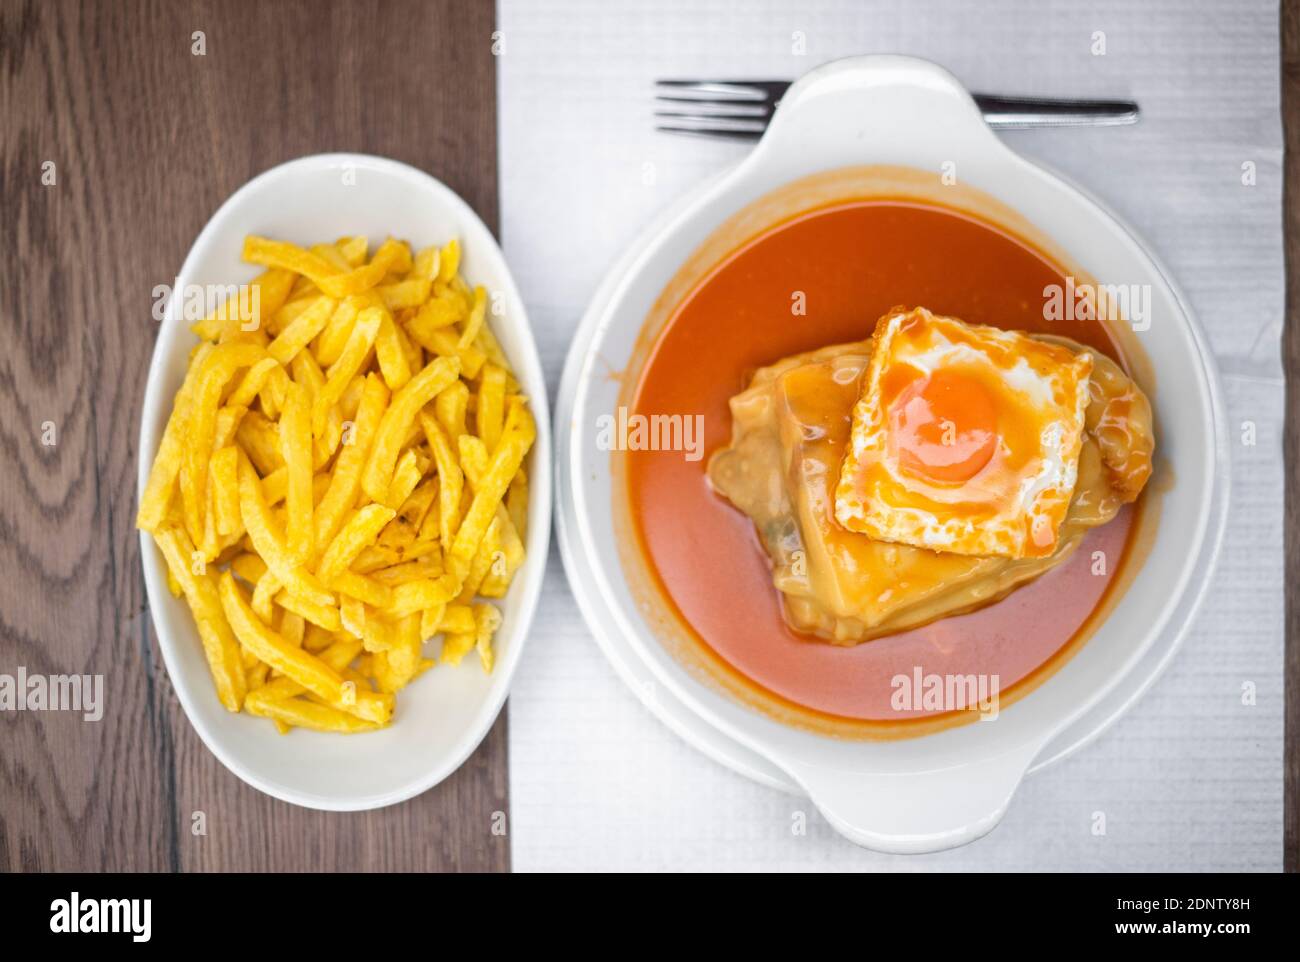 Famous traditional food from Porto called francesinha with french fries, Portugal Stock Photo